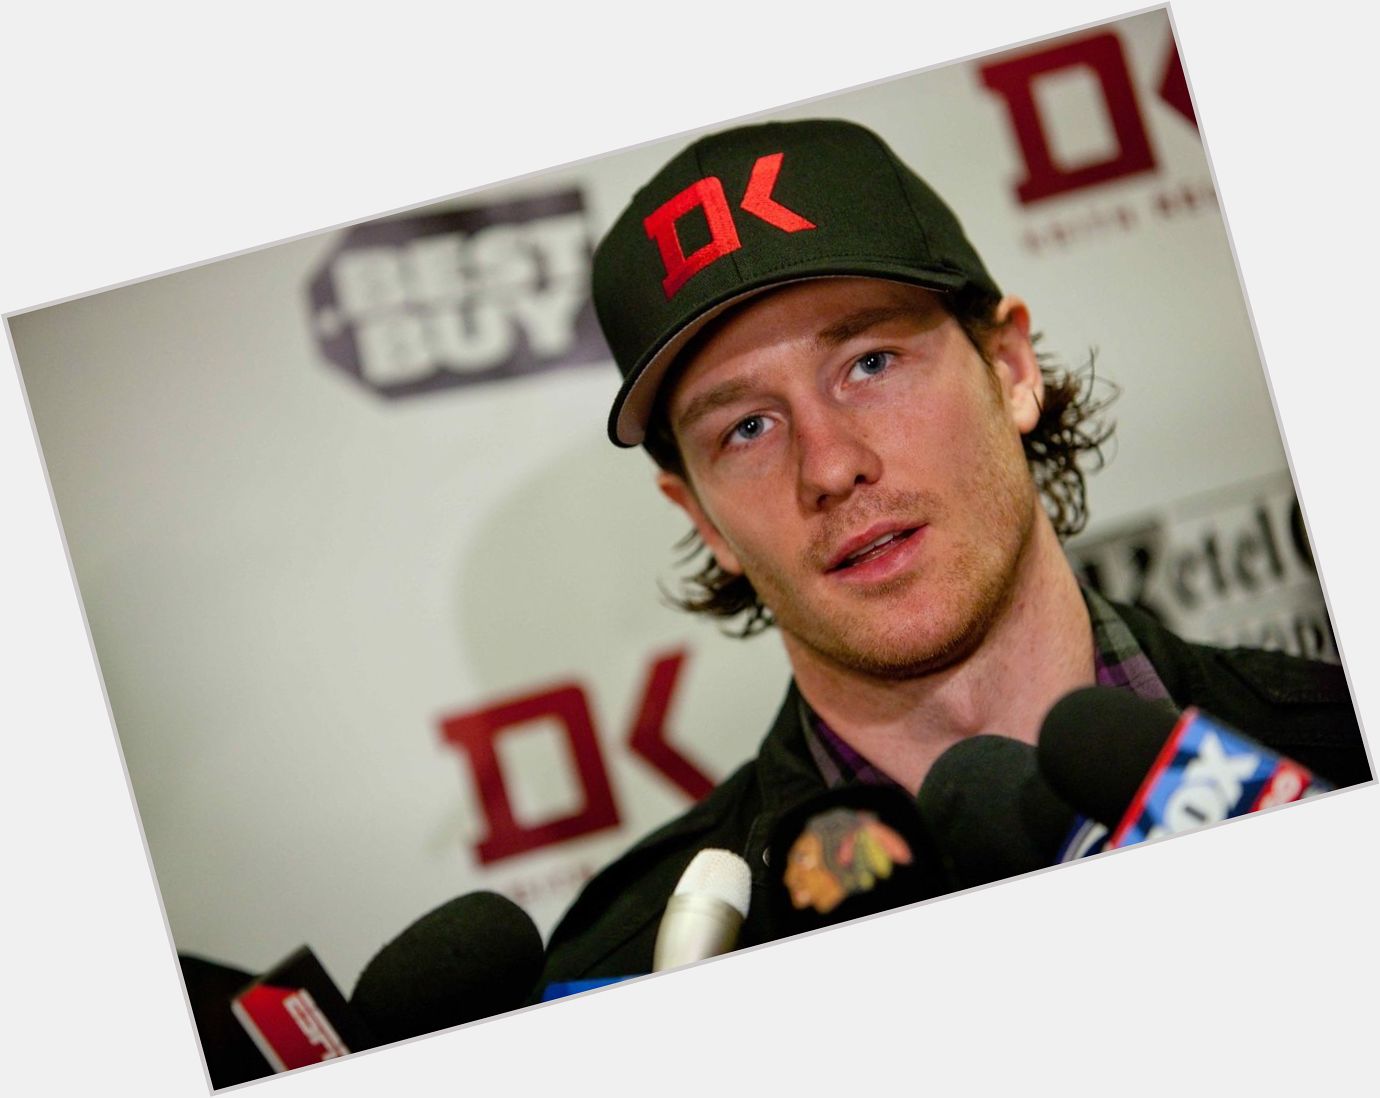 Http://fanpagepress.net/m/D/Duncan Keith Hairstyle 3